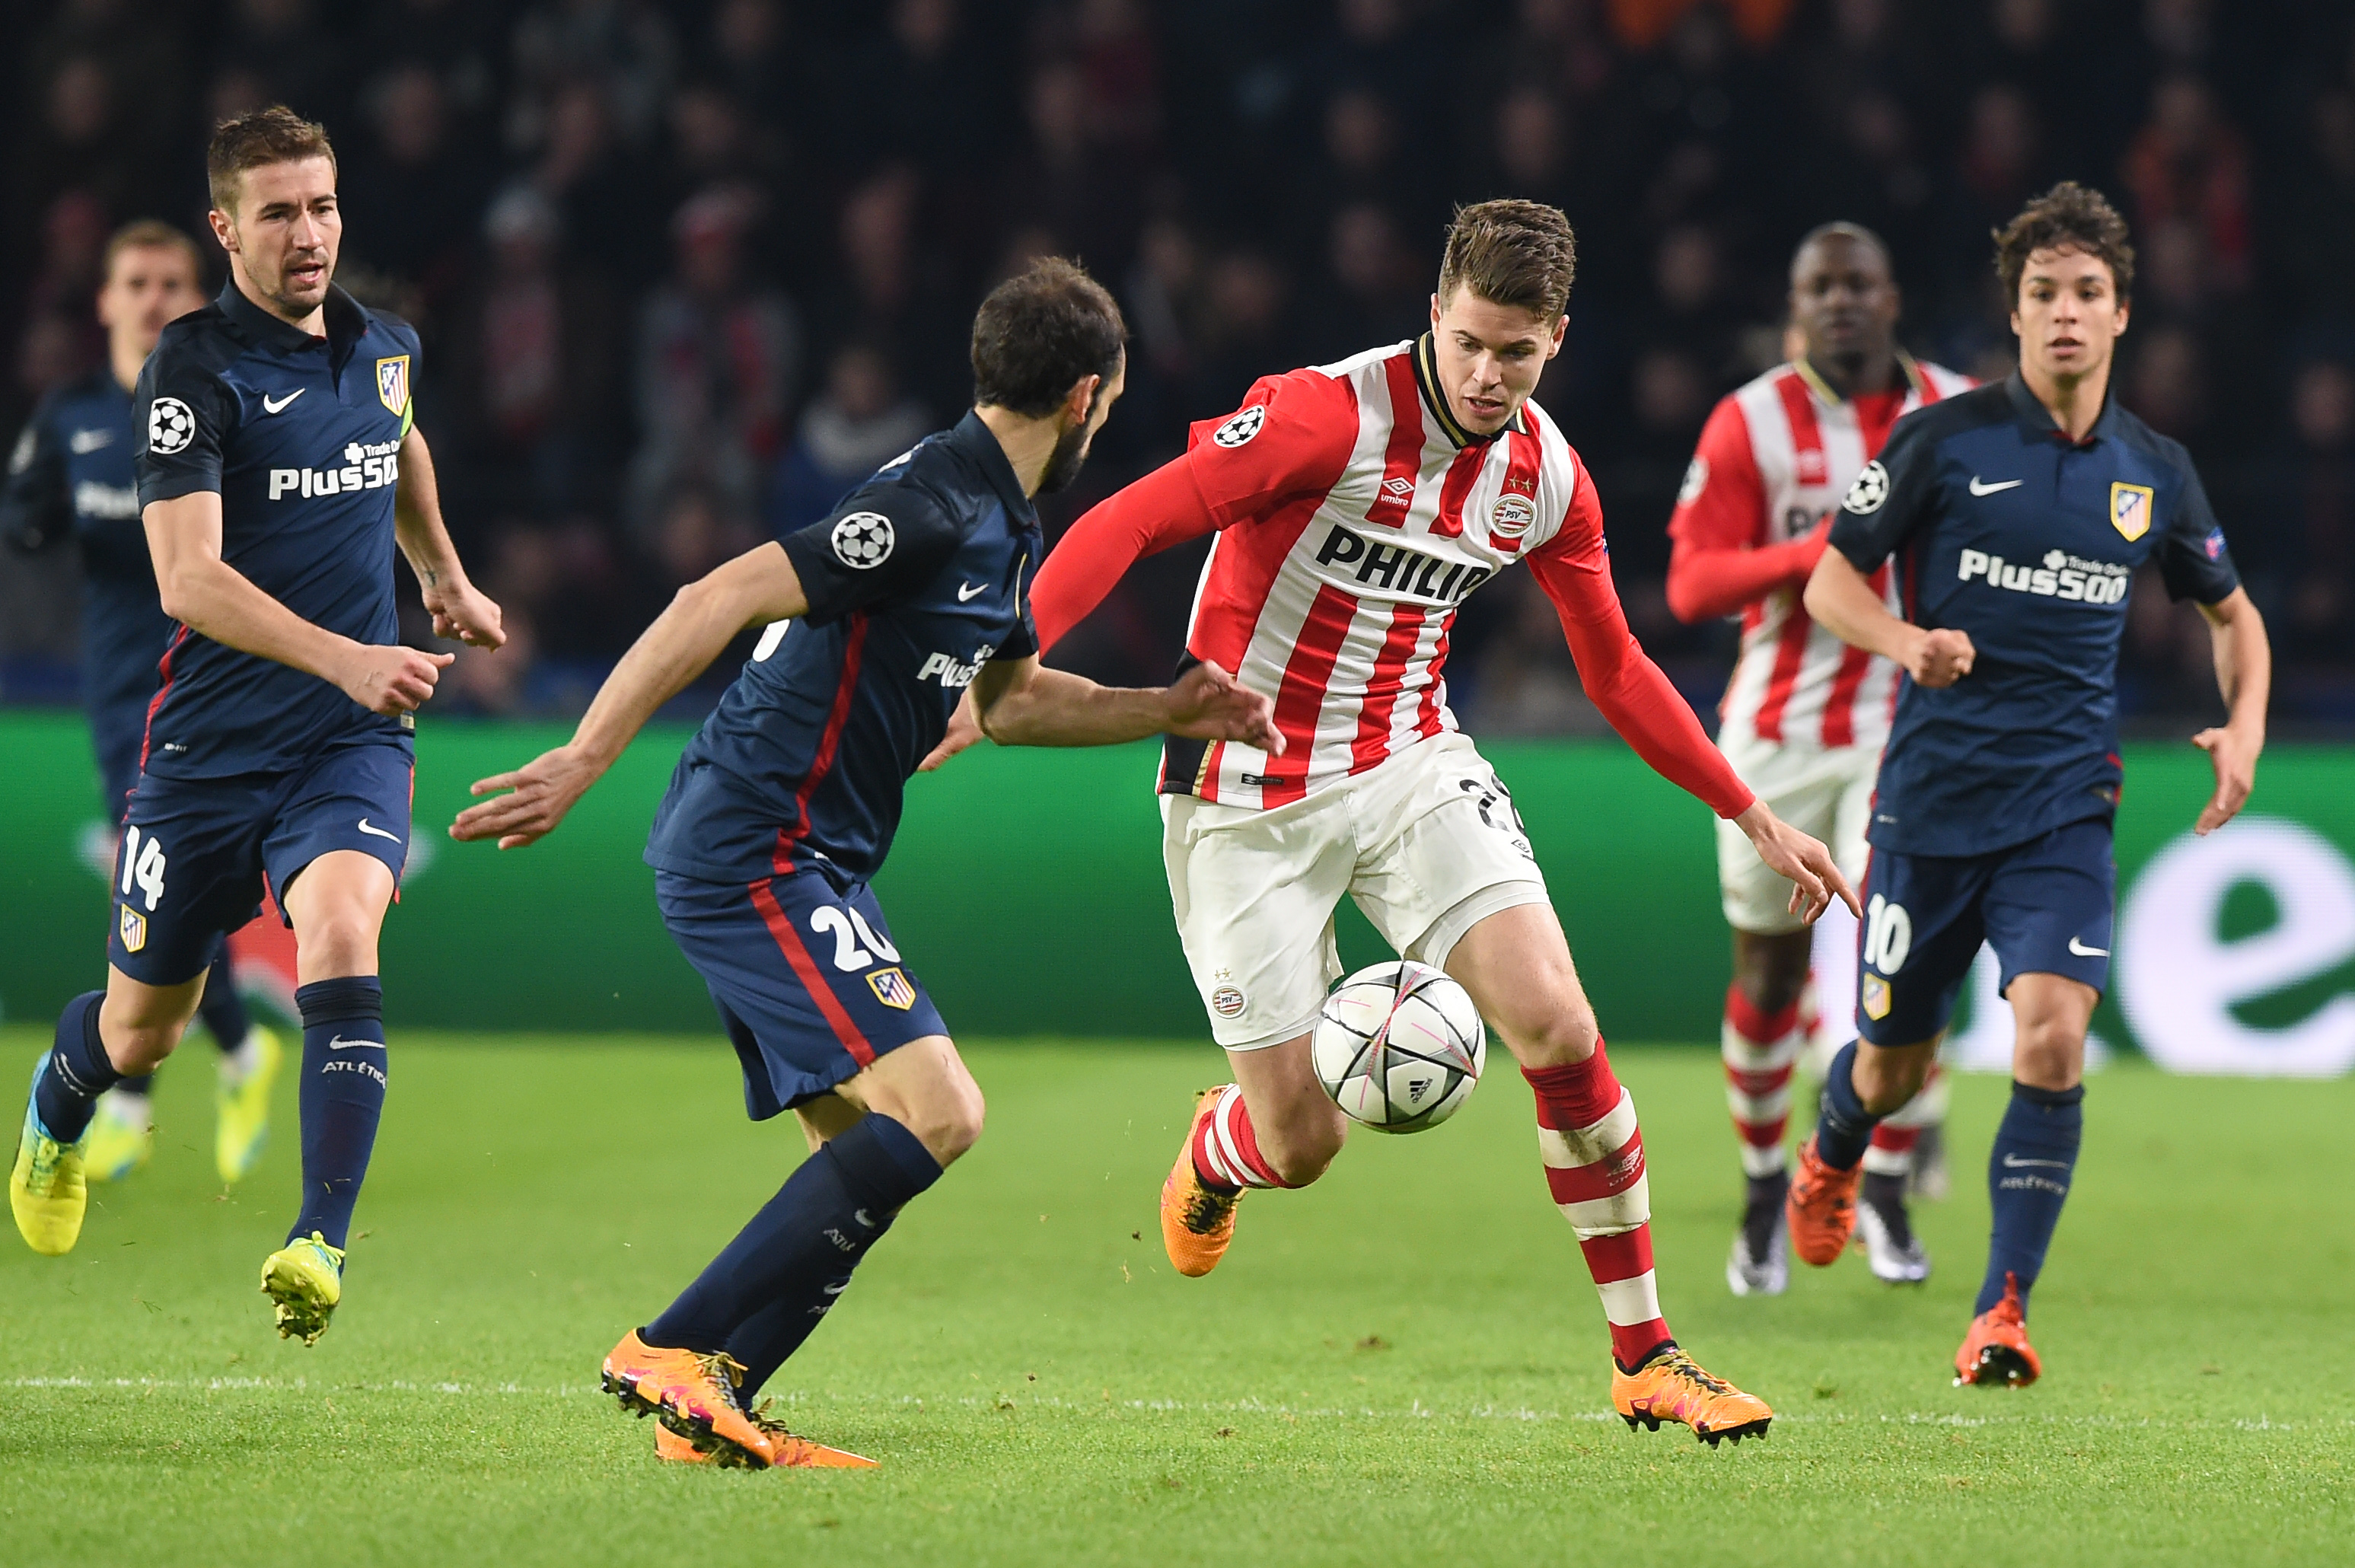 PSV Eindhoven's midfielder Marco van Ginkel (C) fights for the ball against Atletico Madrid's defender Juanfran (2nd L) during the UEFA Champions League round of 16 first leg football match between PSV Eindhoven and Atletico Madrid at the Philips Stadium in Eindhoven on February 24, 2016. AFP PHOTO / EMMANUEL DUNAND / AFP / EMMANUEL DUNAND        (Photo credit should read EMMANUEL DUNAND/AFP/Getty Images)